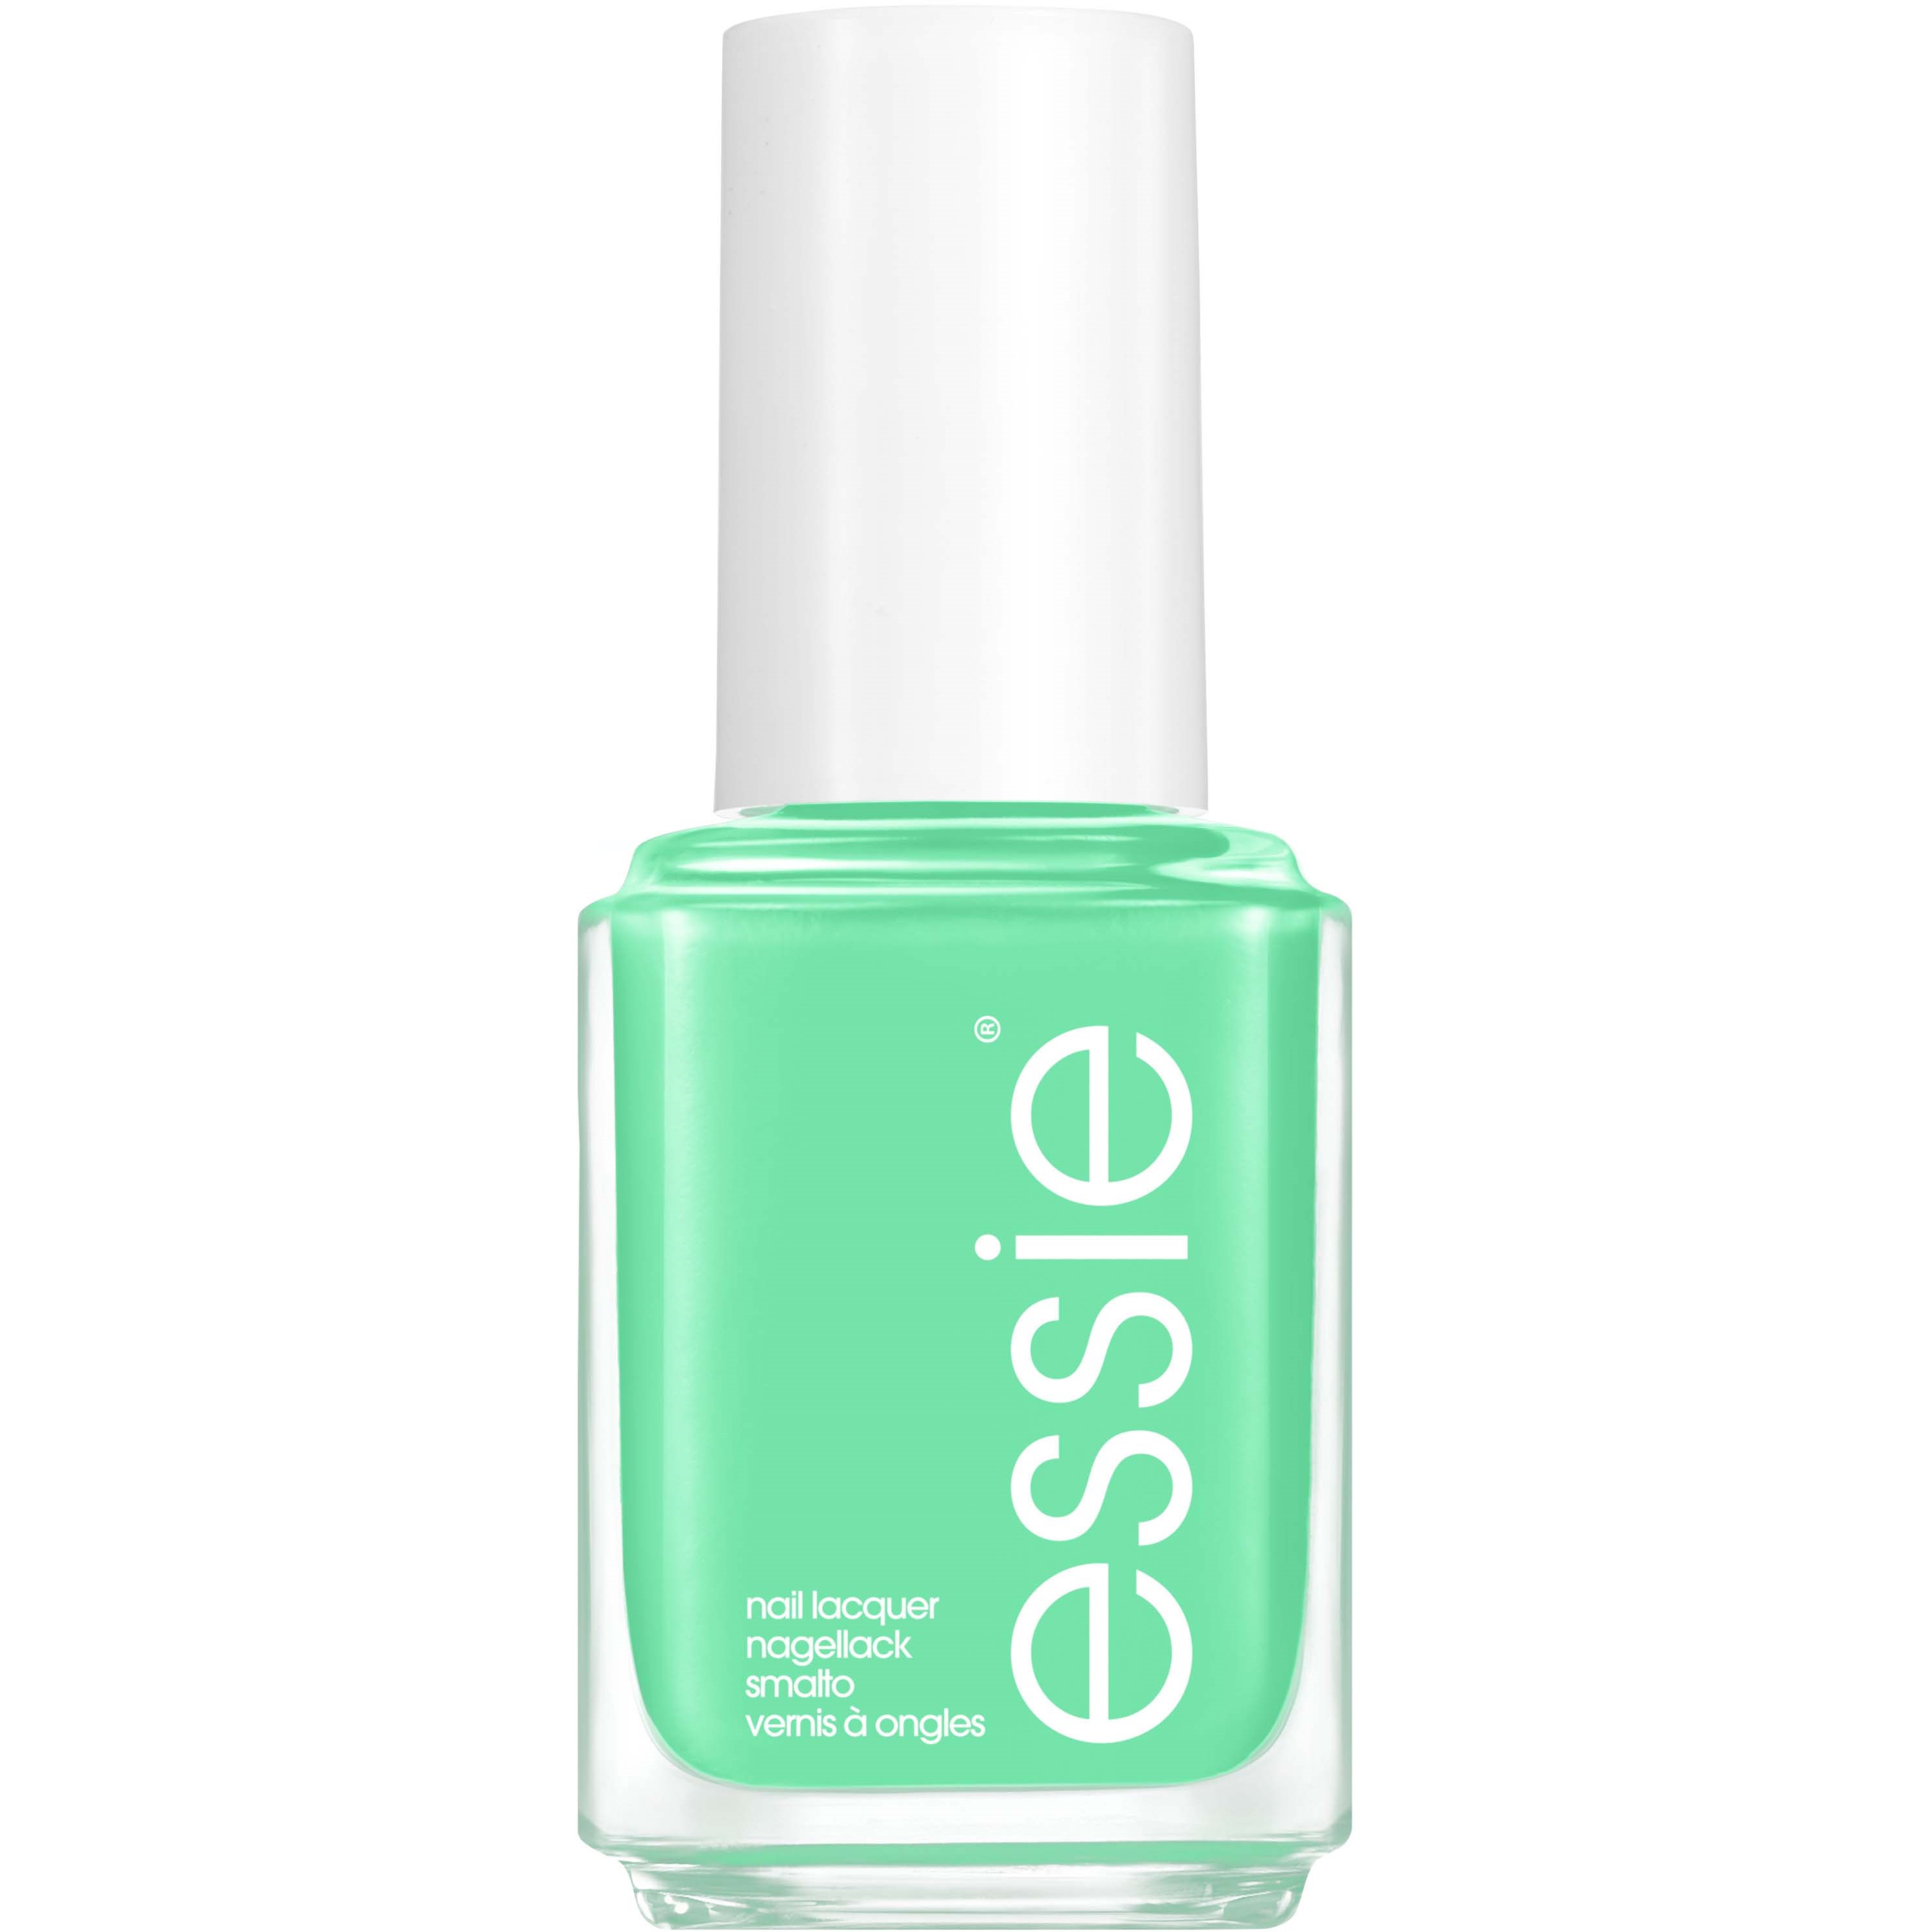 Essie Nail Lacquer 957 Perfectly Peculiar - Turquoise